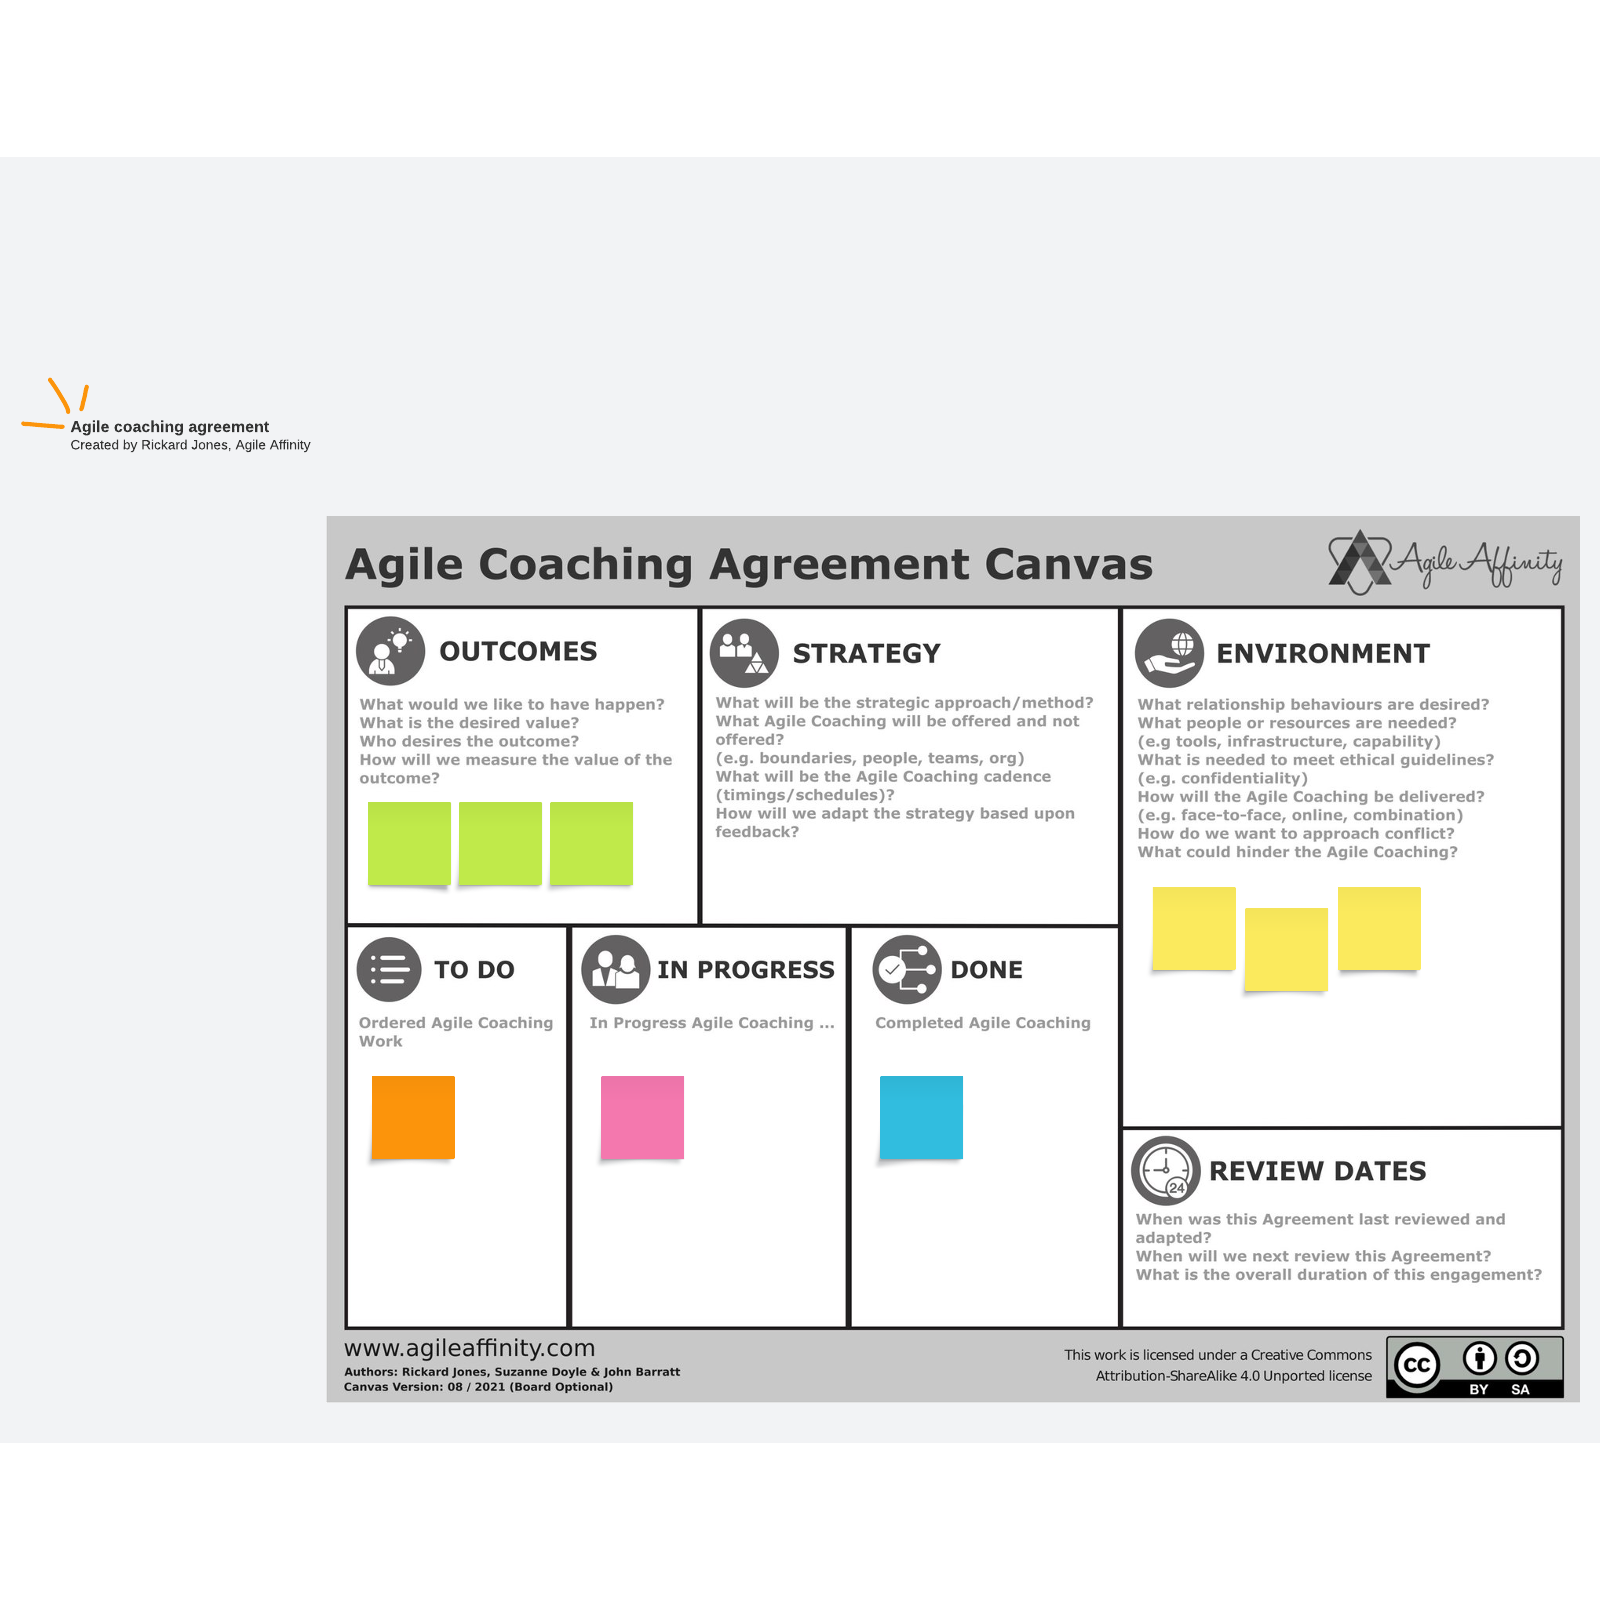 Agile coaching agreement canvas example